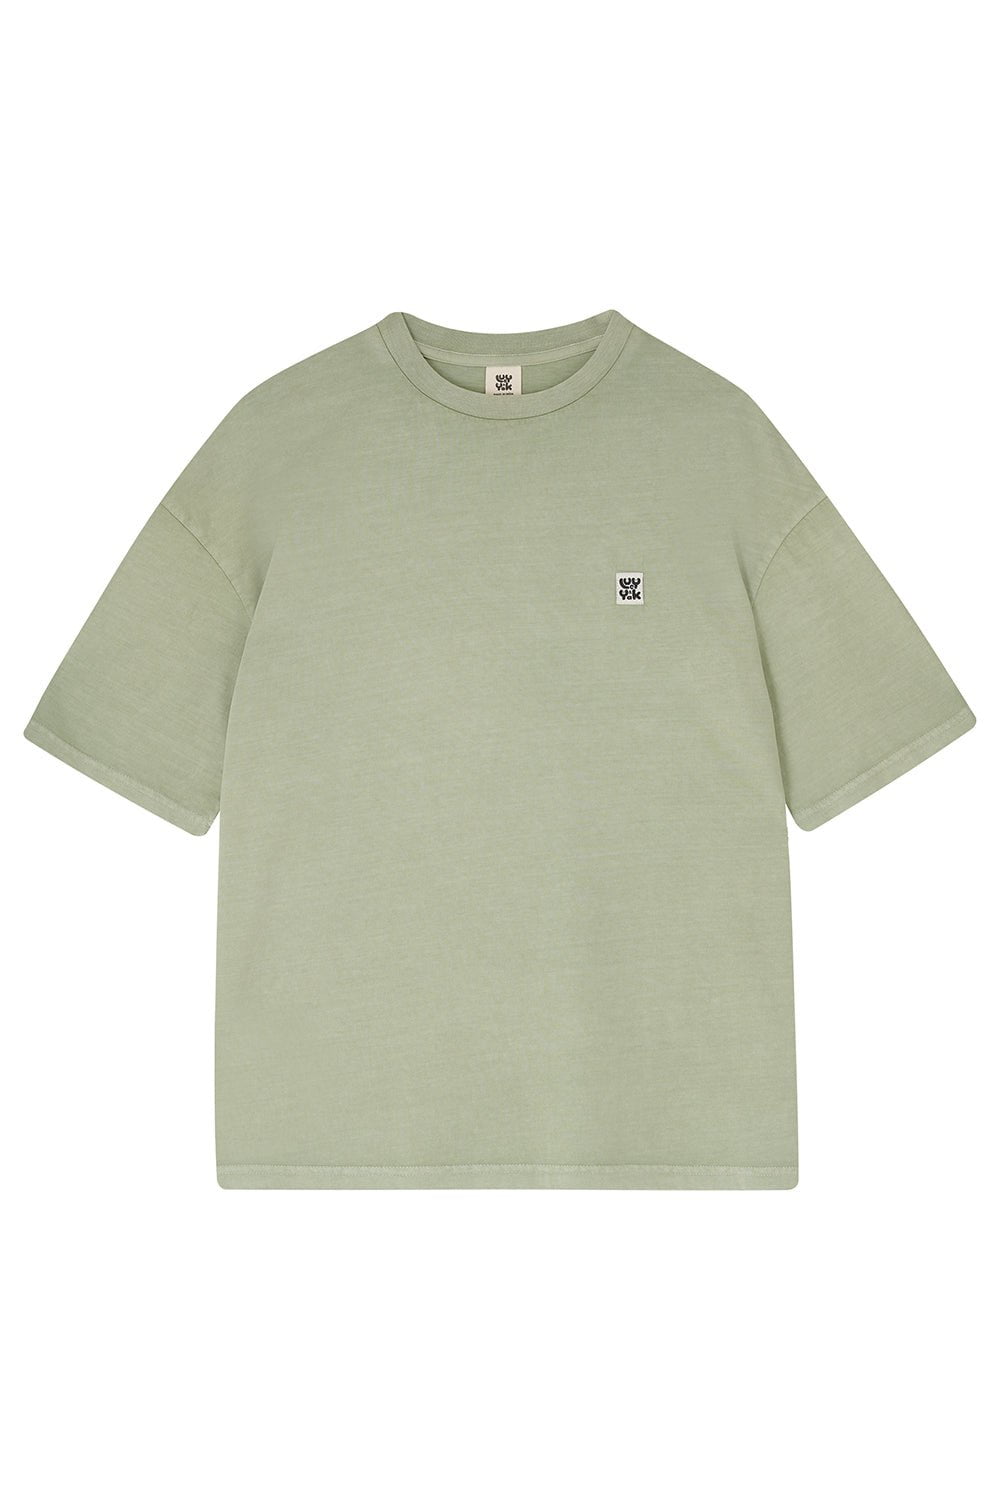 Lucy & Yak Tops Copy of Benny Tee: ORGANIC COTTON - Stone Green